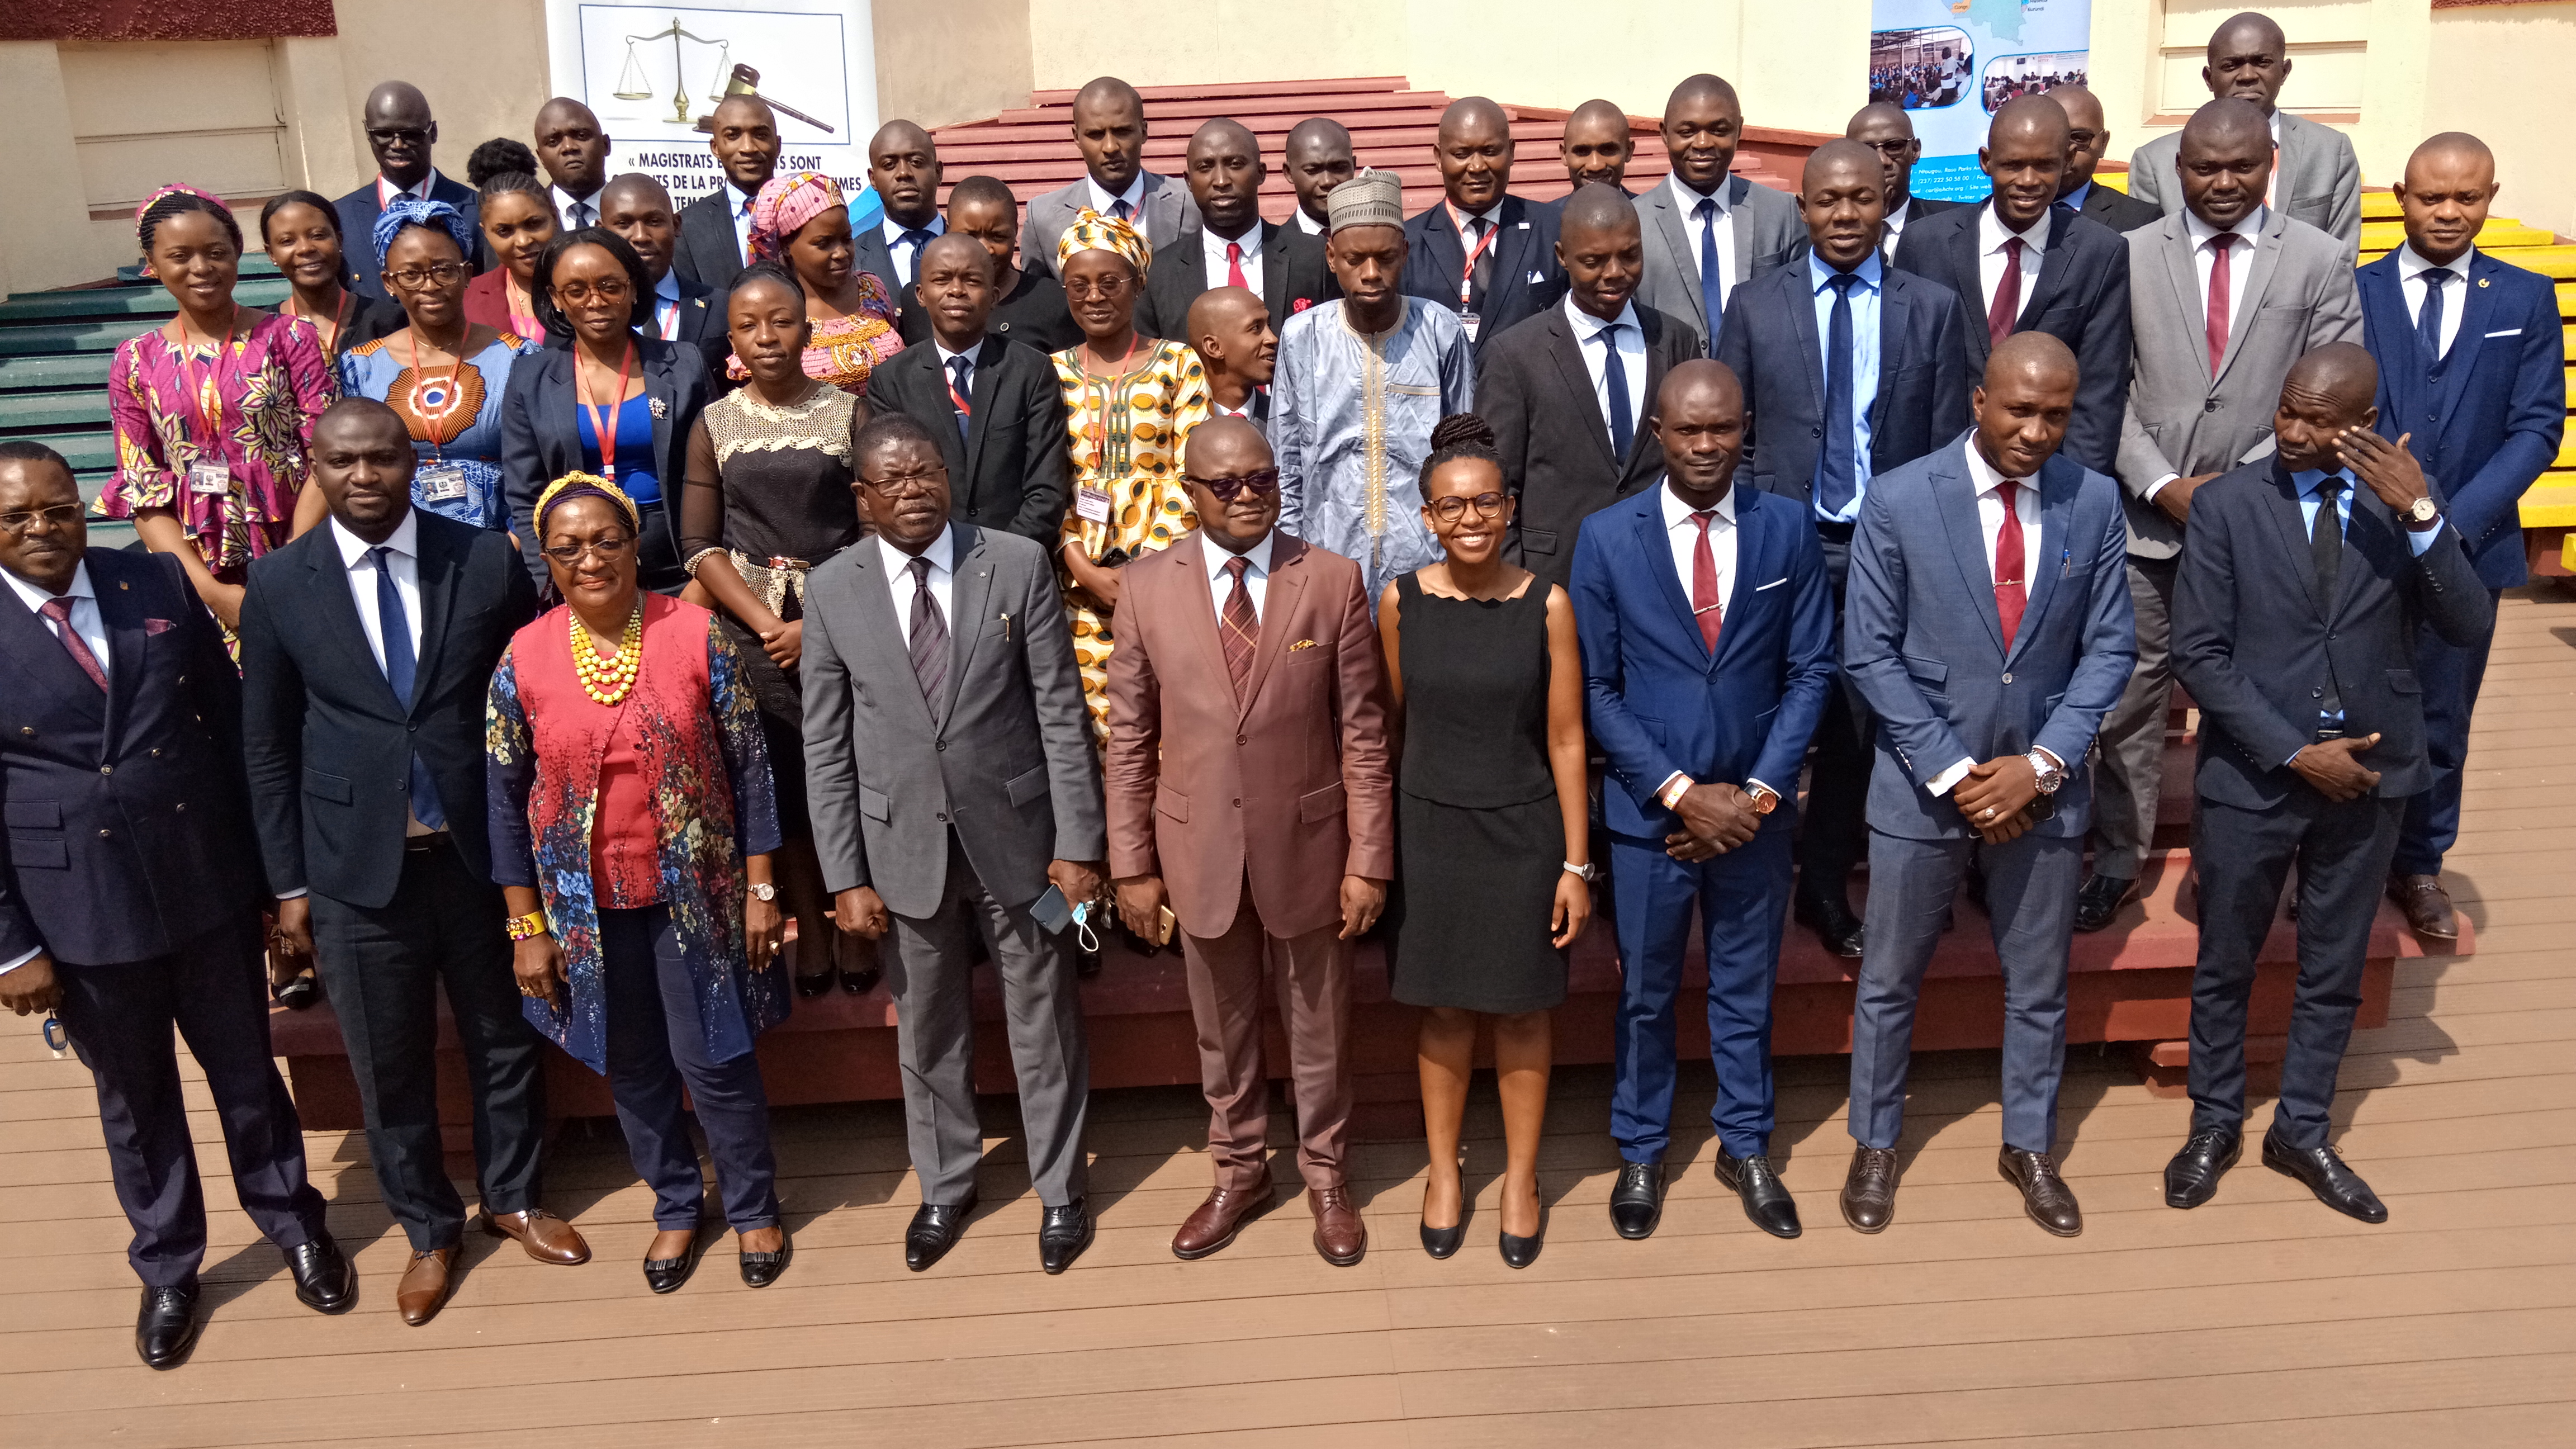 Cameroon: Pupil Magistrates trained on Human Rights, the Rule of Law, and the Prevention of Terrorism